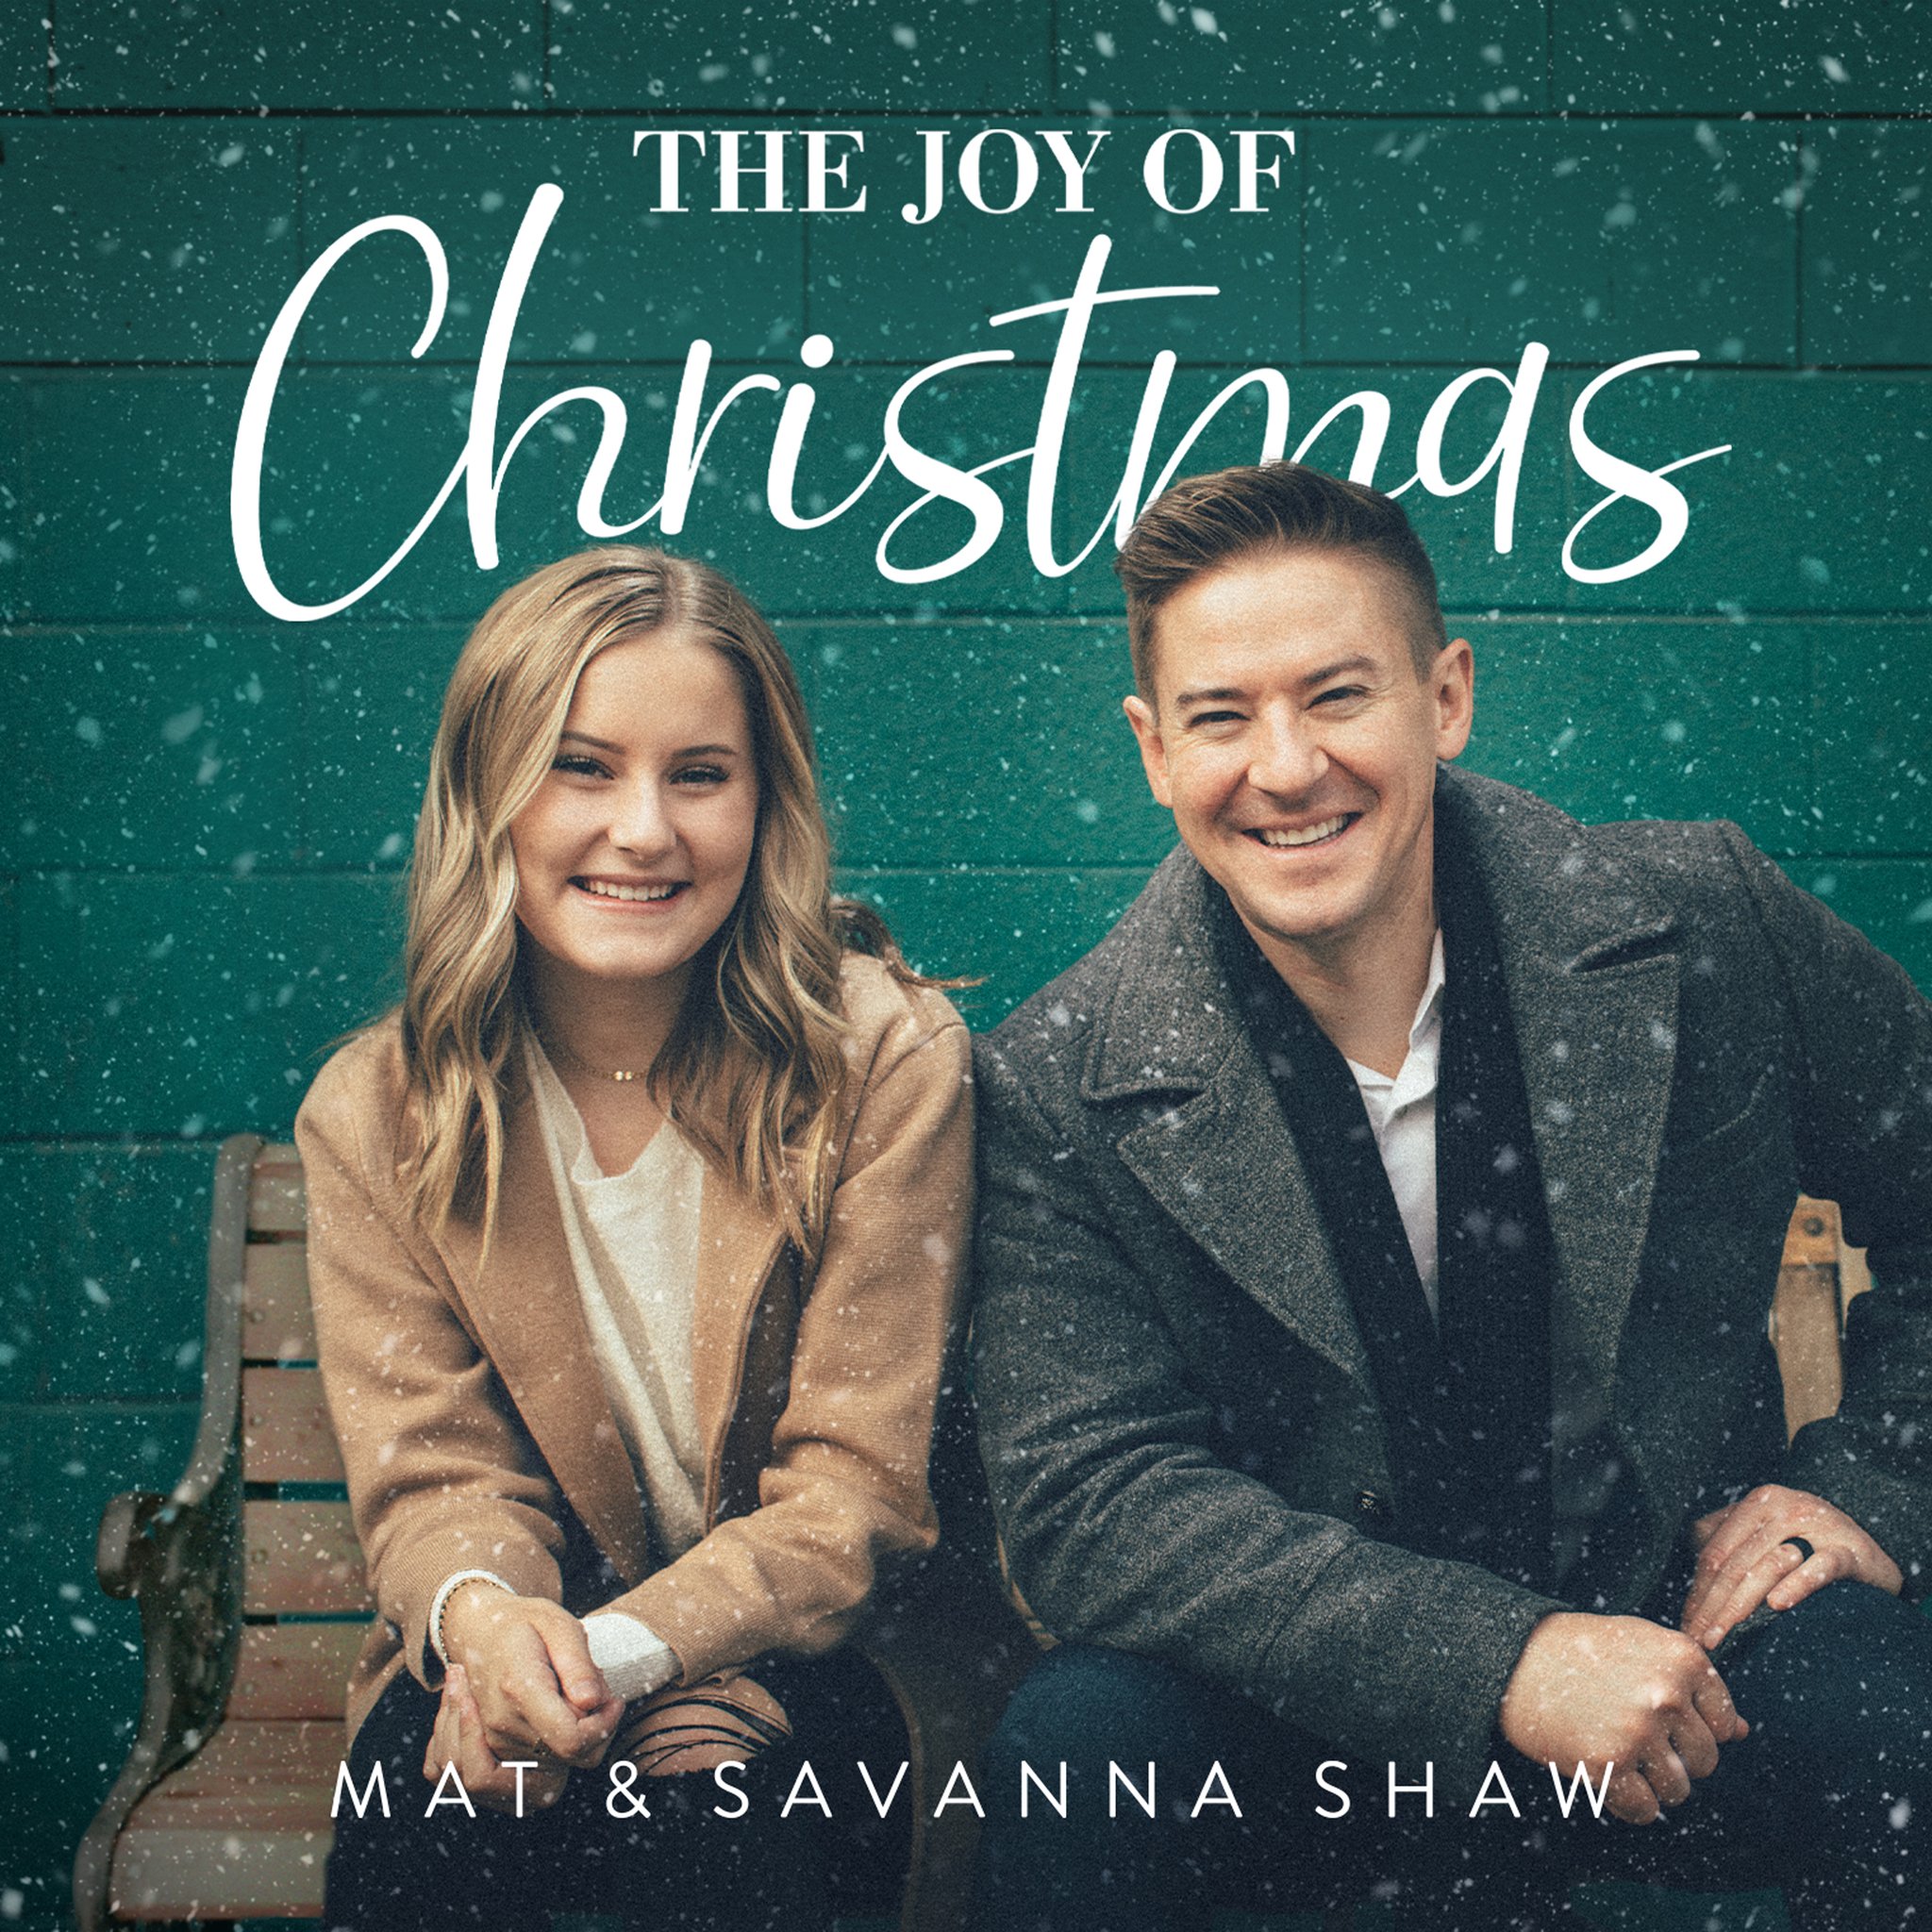 Mat and Savanna Shaw Release New Christmas Album and Prepare for 2021 Christmas Tour